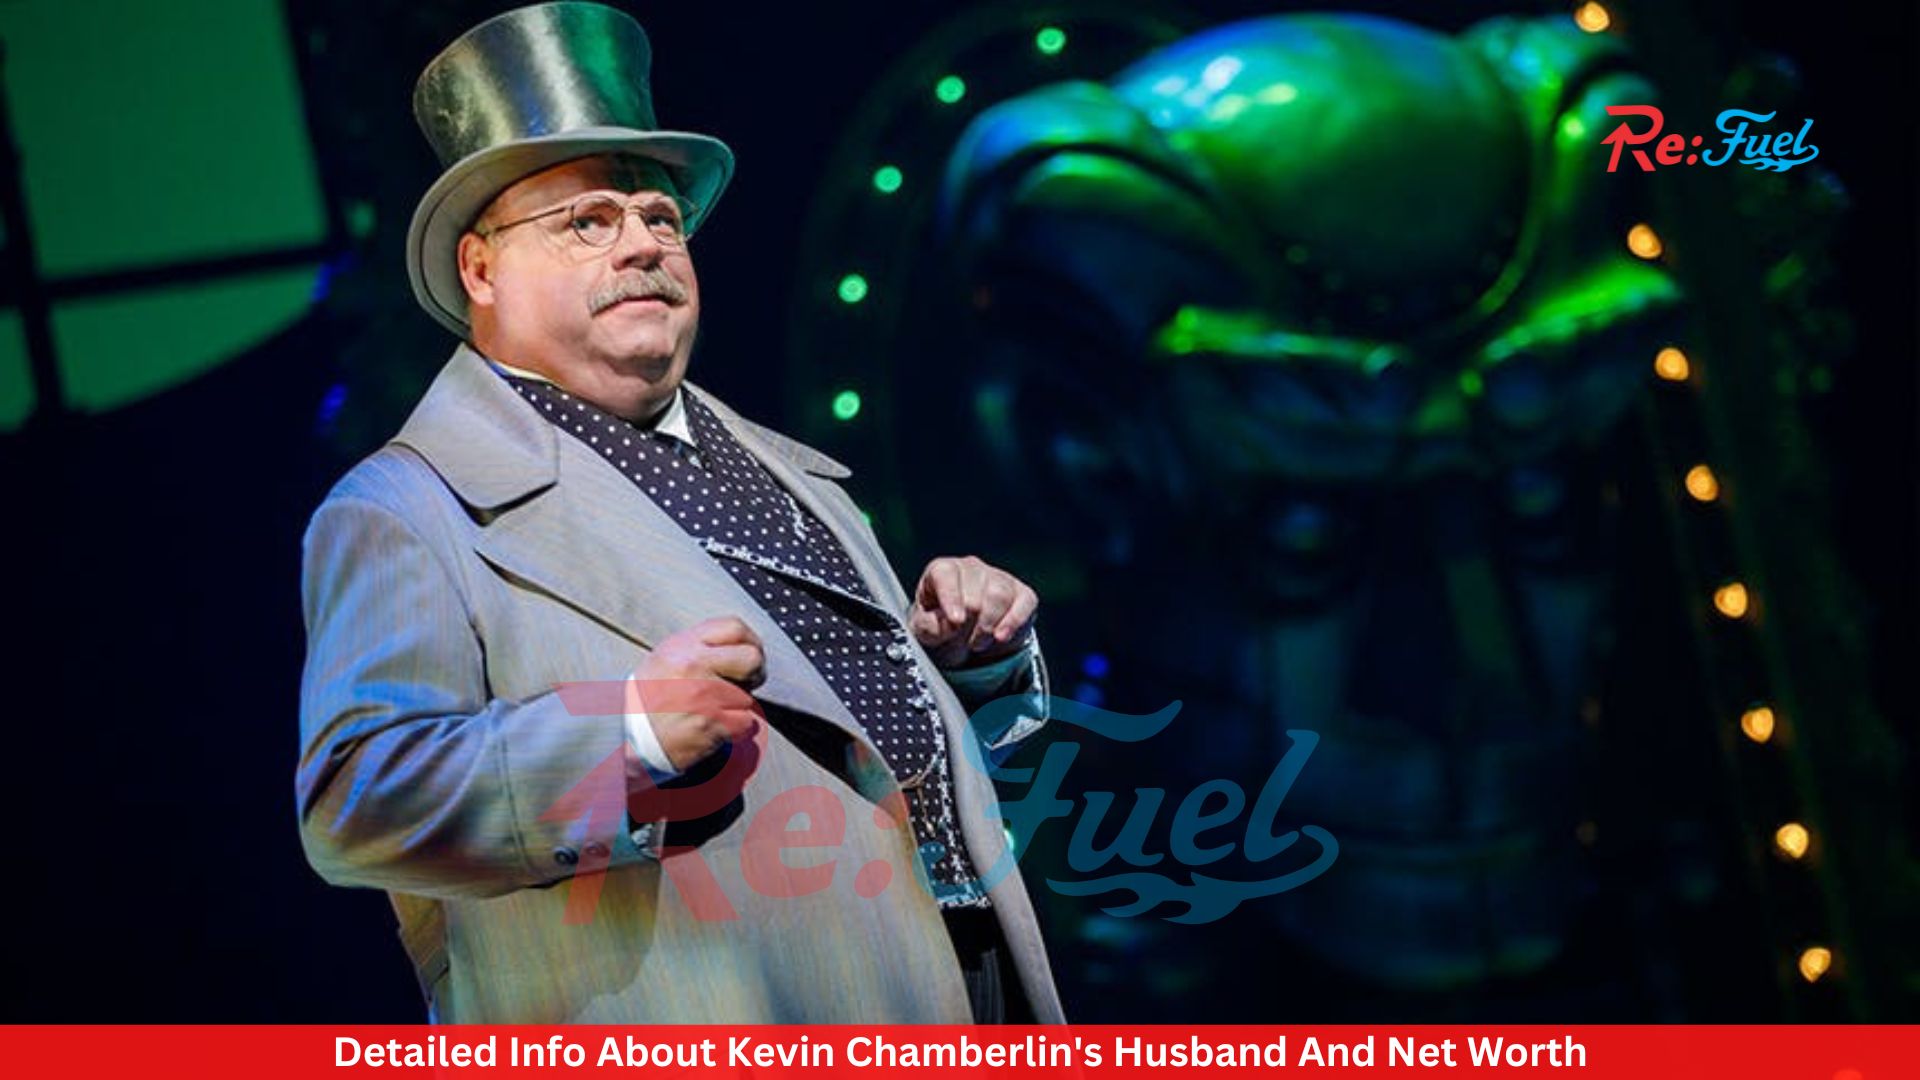 Detailed Info About Kevin Chamberlin's Husband And Net Worth